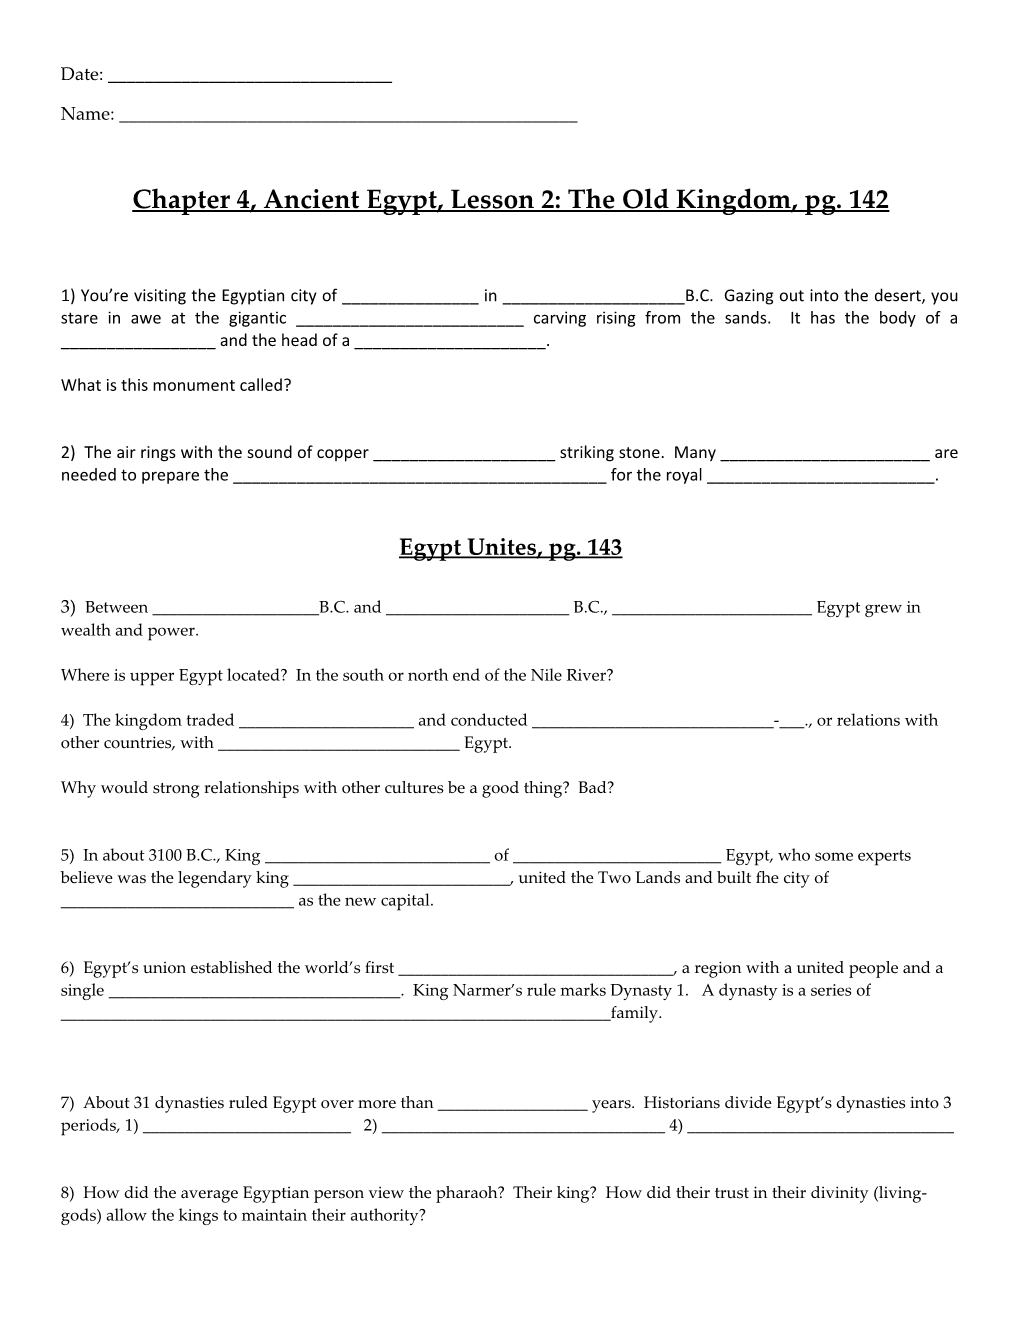 Chapter 4, Ancient Egypt, Lesson 2: the Old Kingdom, Pg. 142